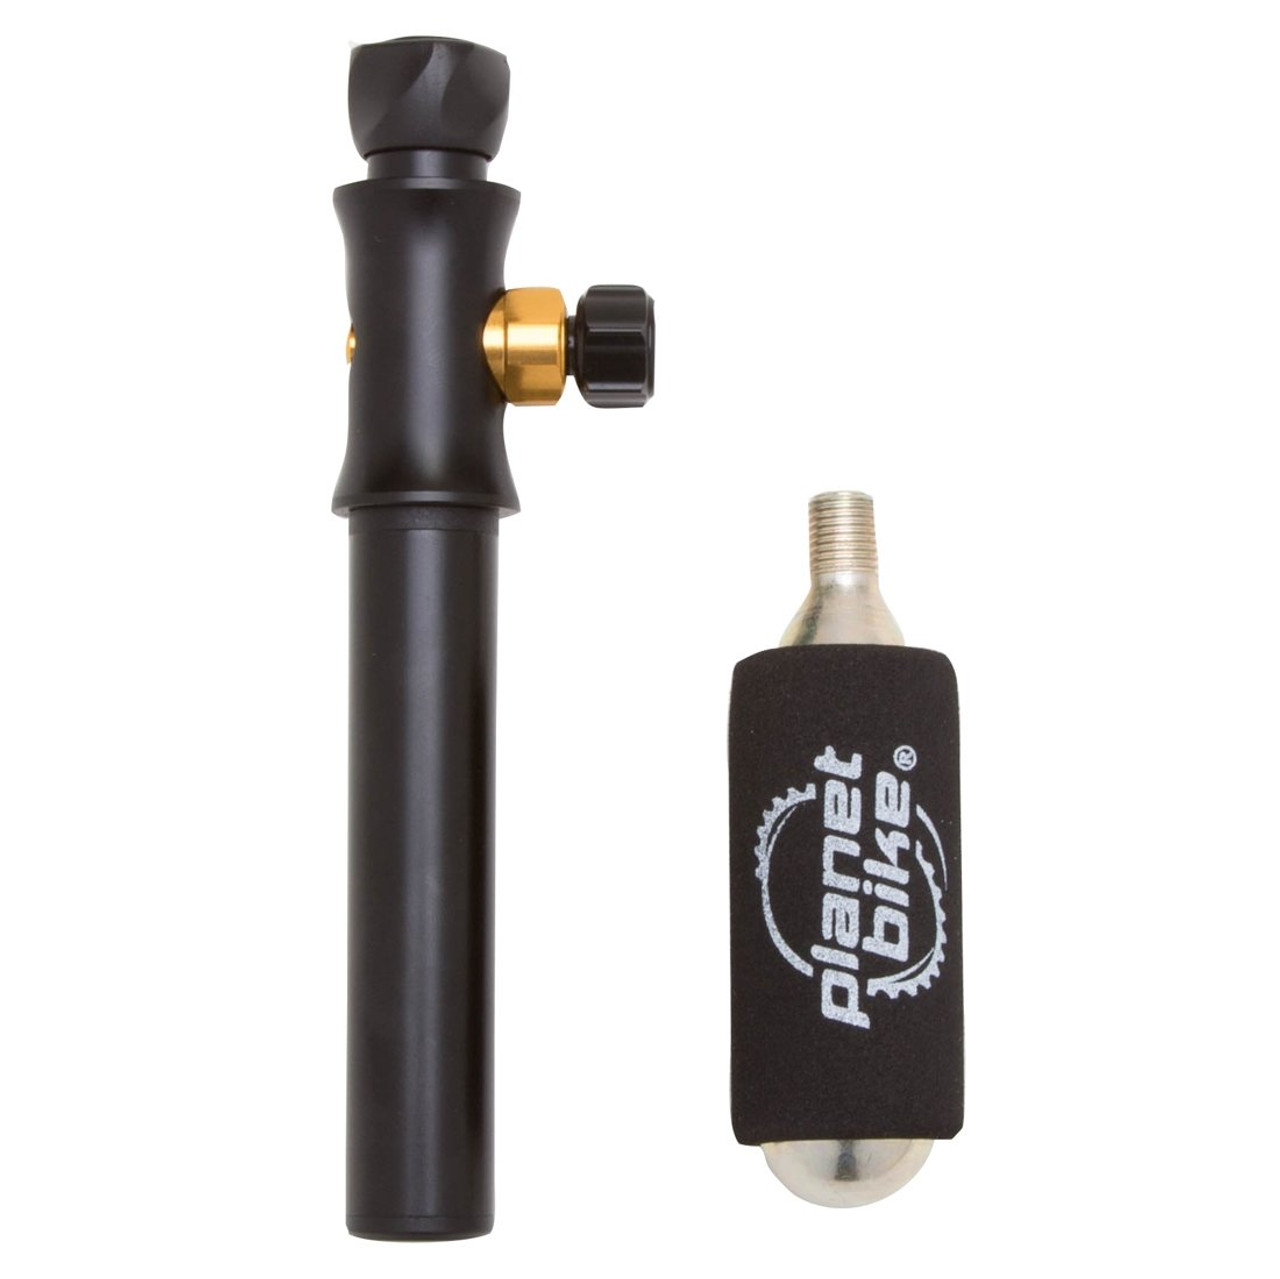 Co2 Psi For Sodacxwxc Mini Co2 Bike Pump With Presta/schrader Adapter For  Mtb Tire Inflation